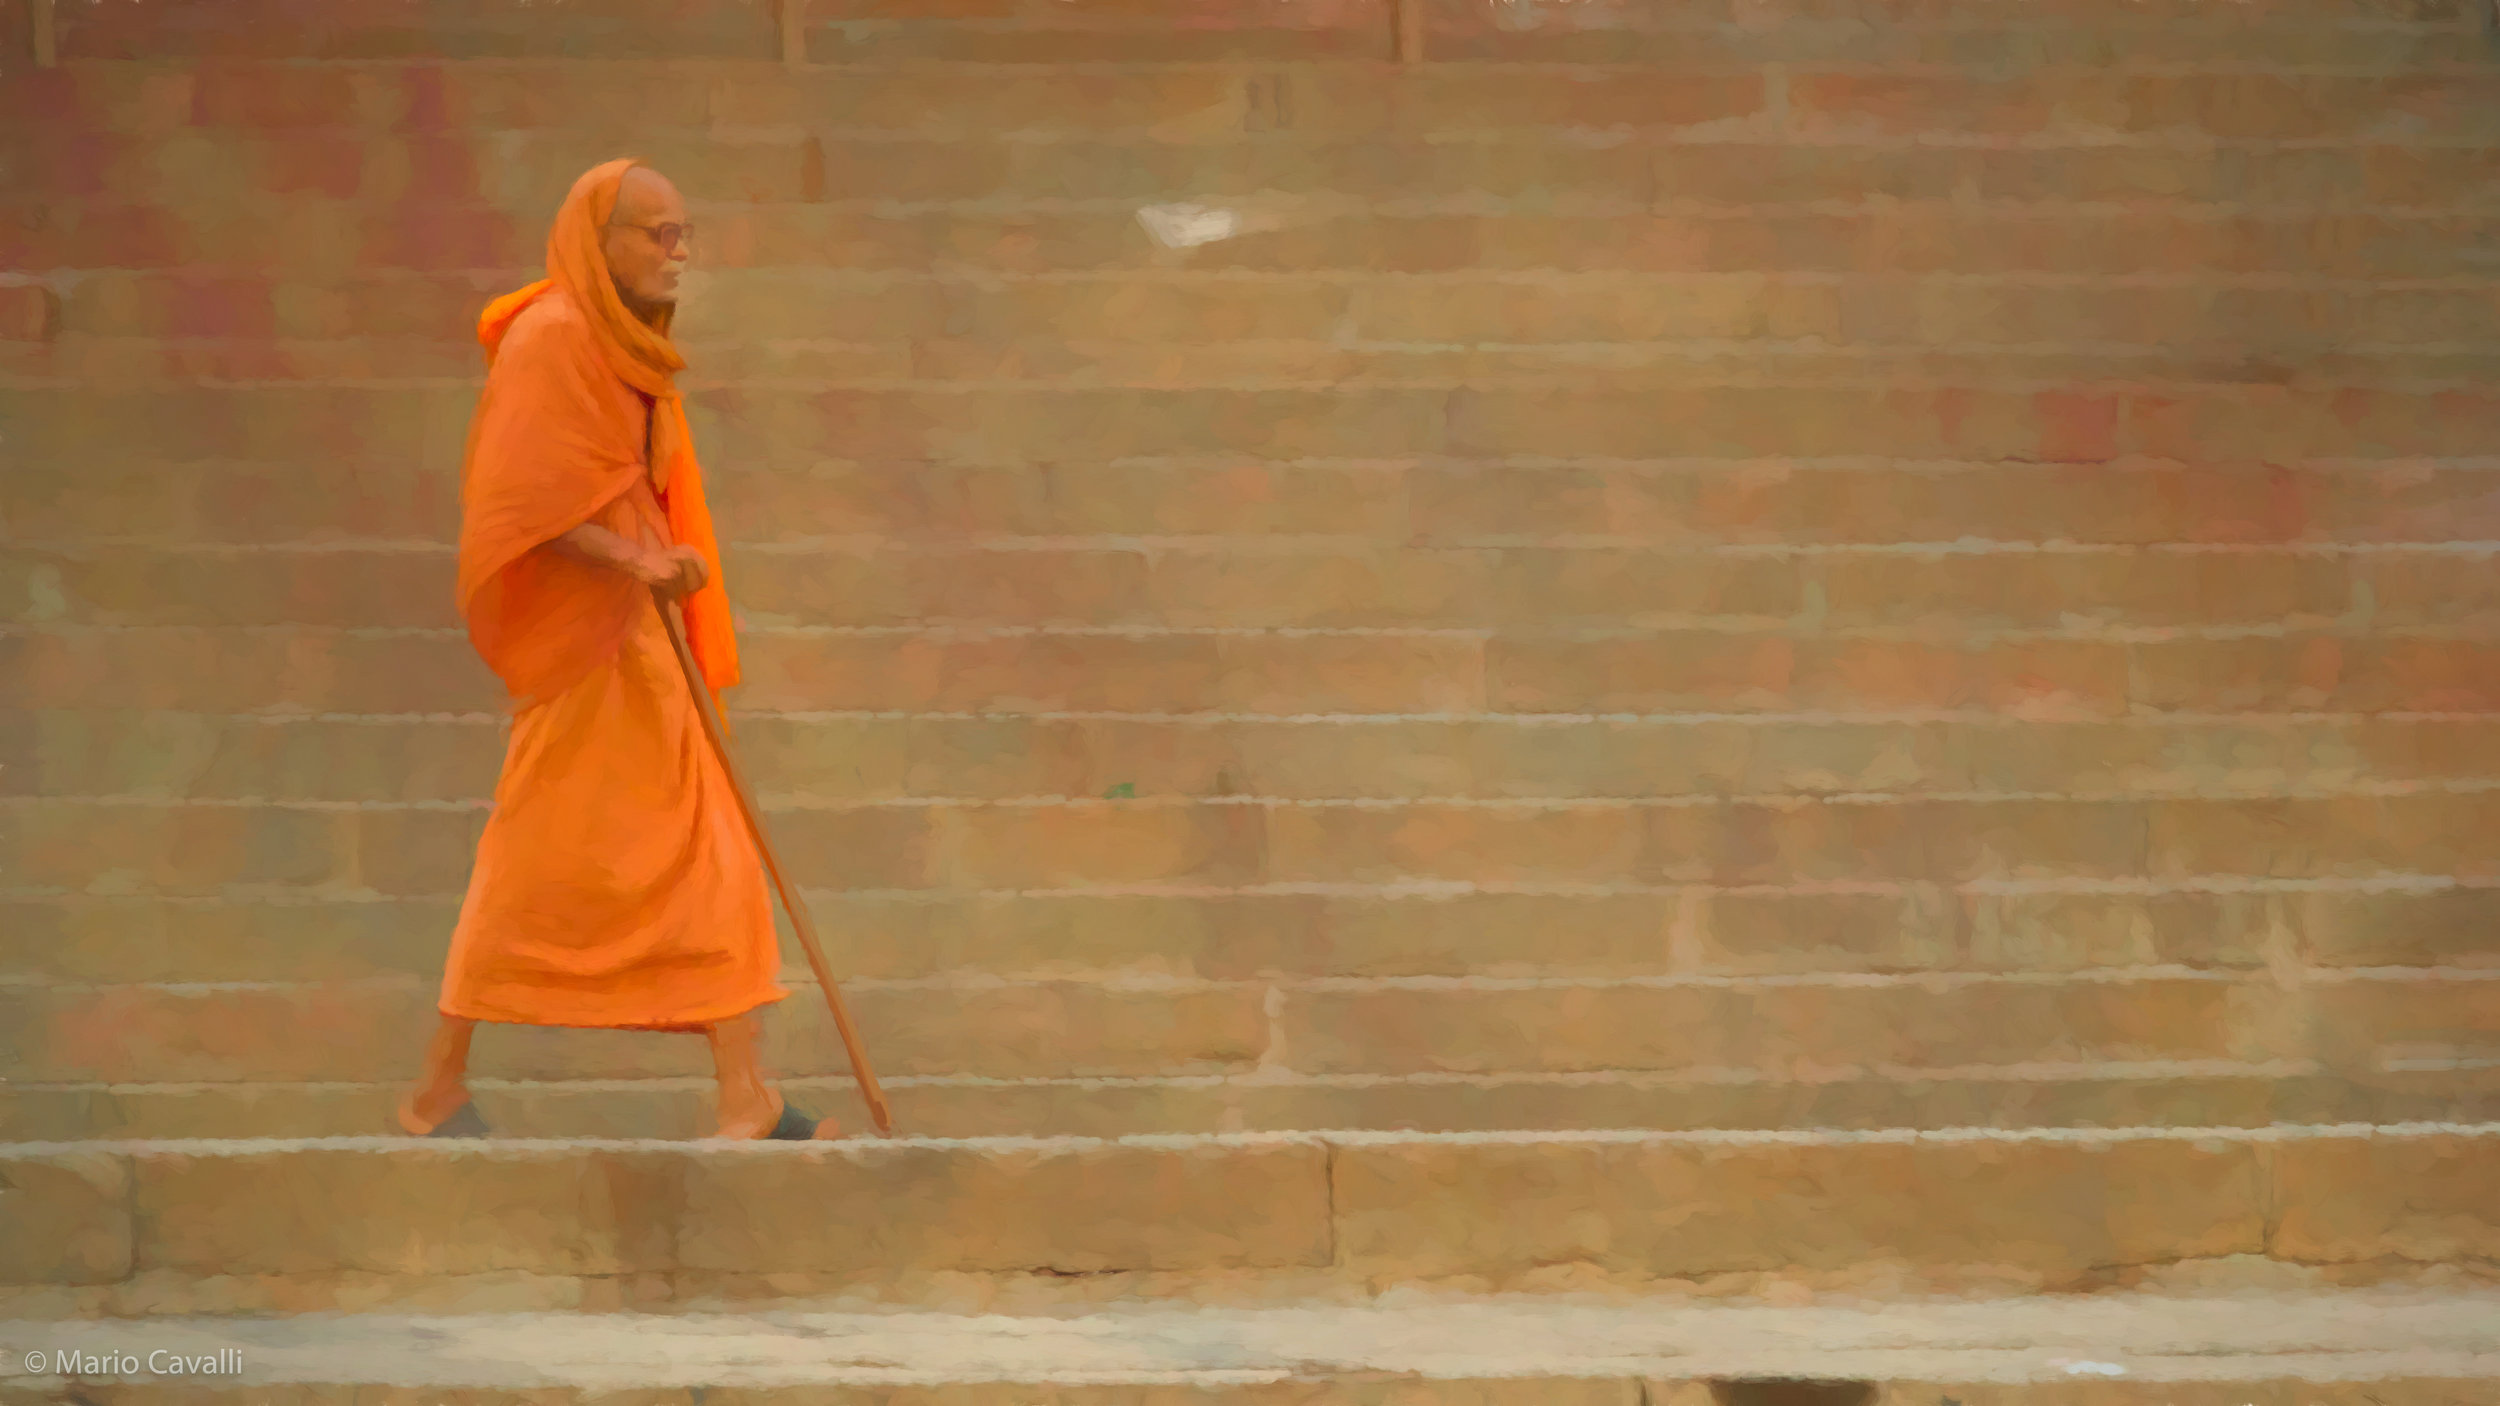 Monk on the Ghat